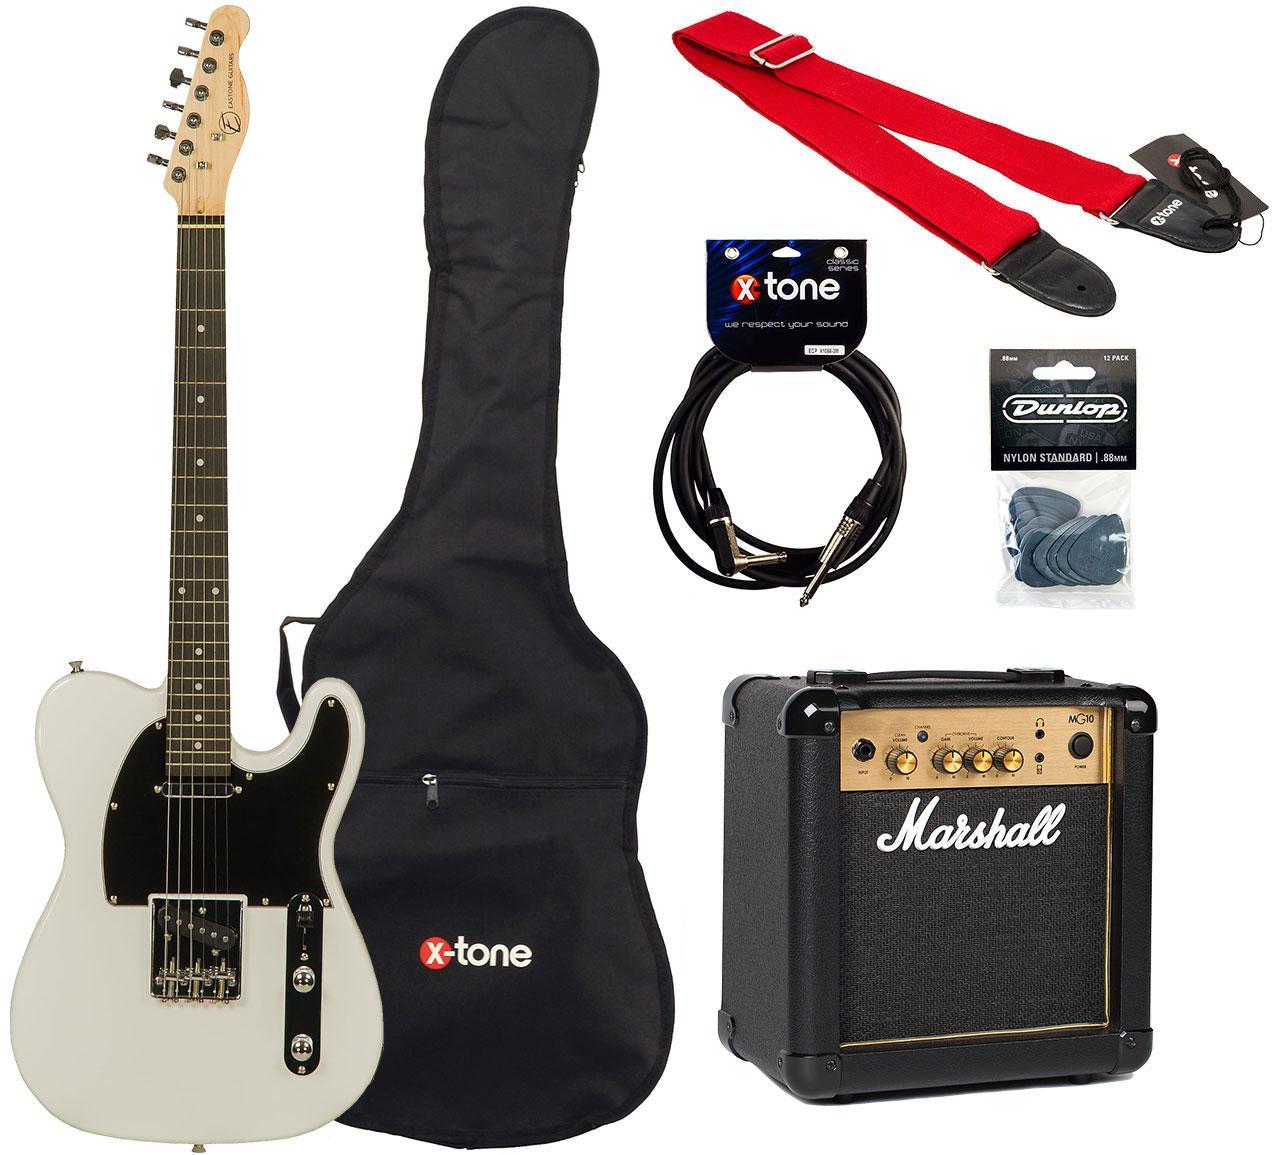 Pack guitare électrique Eastone TL70 +Marshall MG10 +Accessories - Olympic white